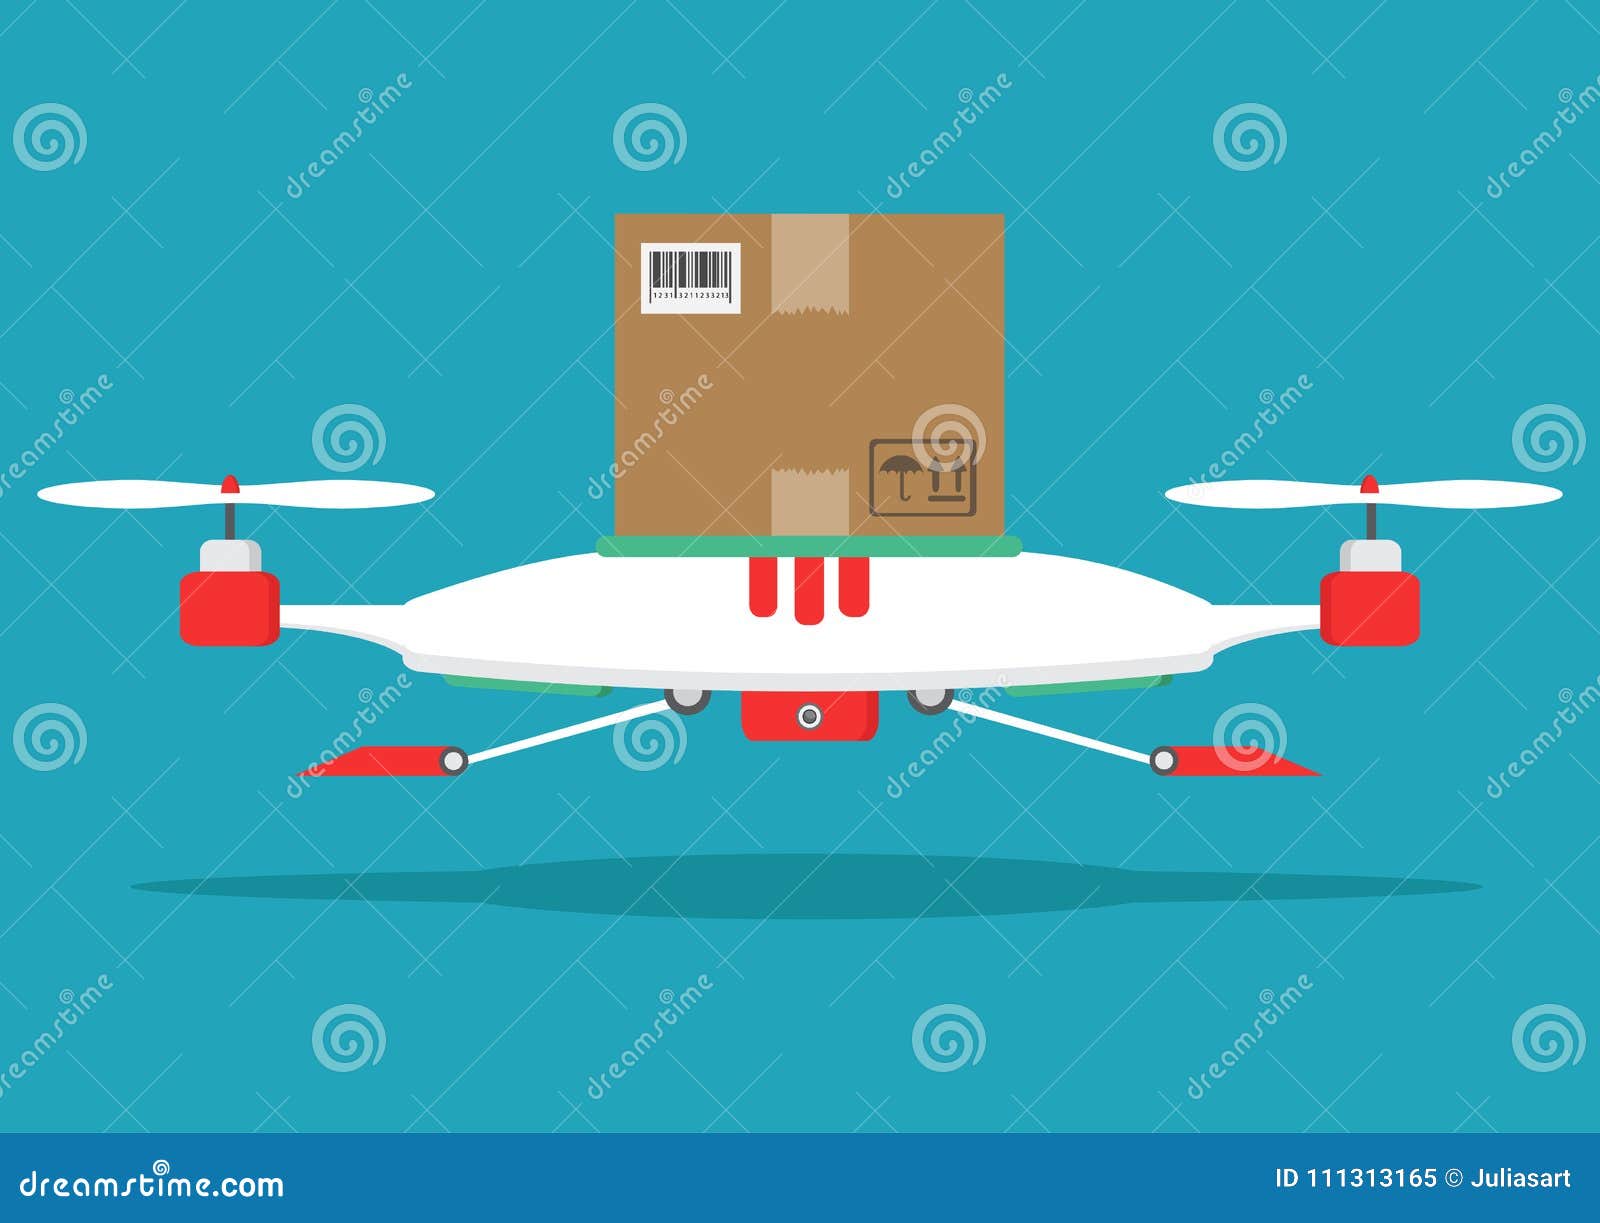 dron delivers the parcel. the concept of fast, free delivery, gi